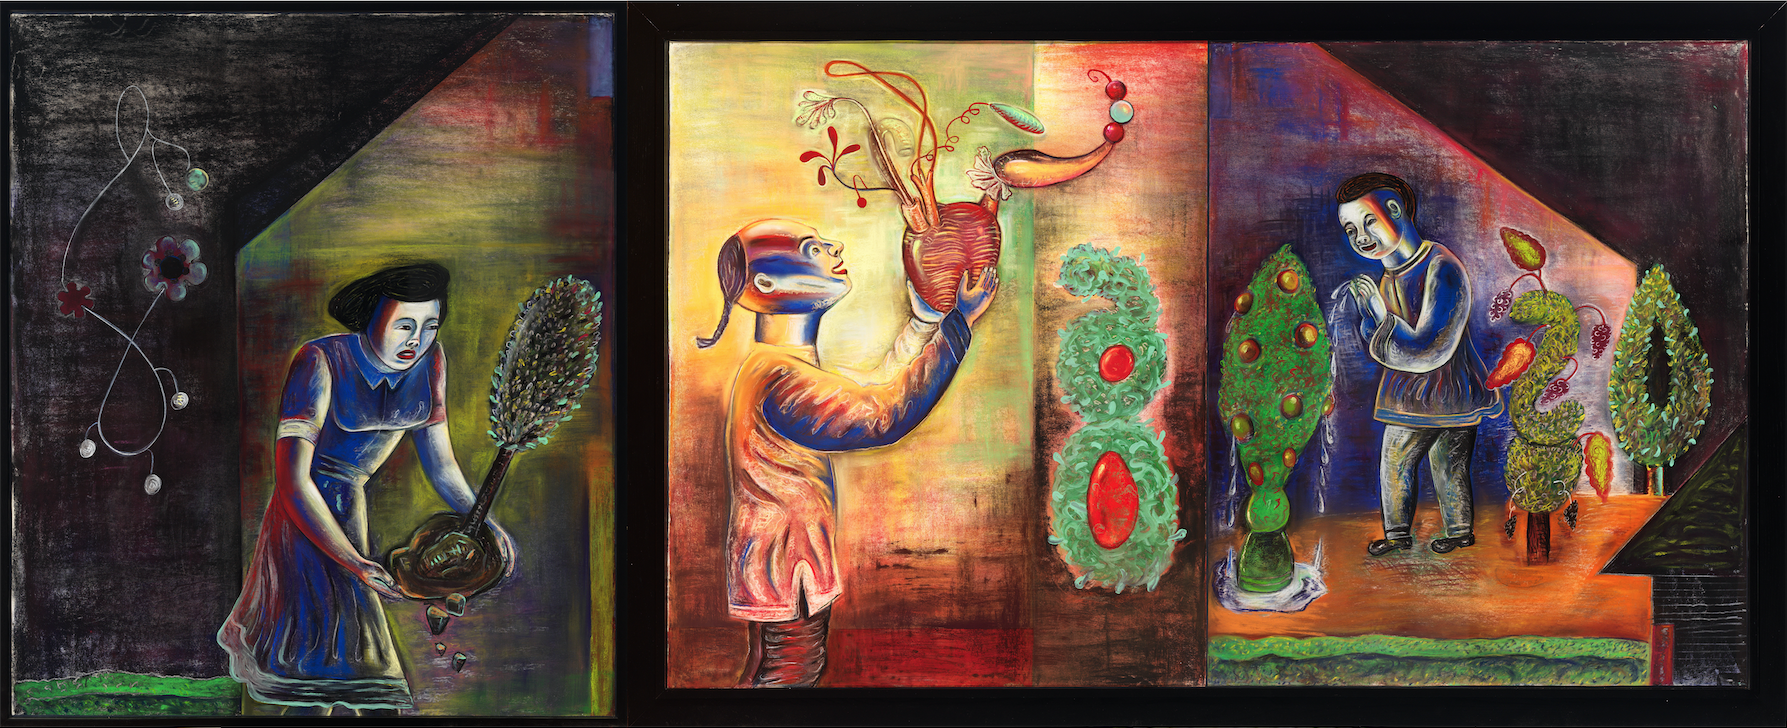 Going from One Place to Another, 42" × 126", pastel on paper, 1989